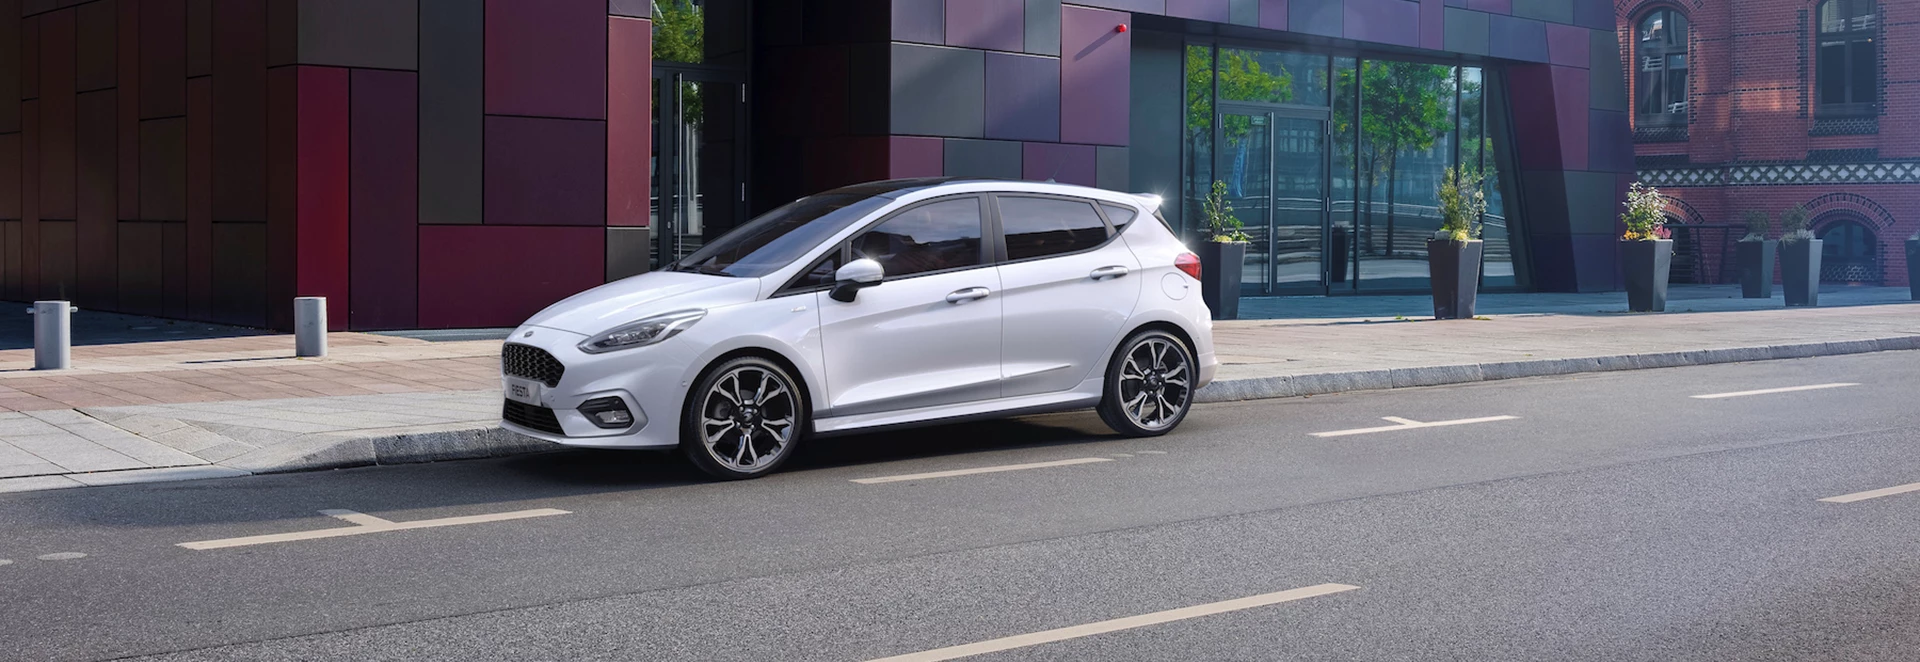 Ford Fiesta updated with new mild-hybrid powertrains 